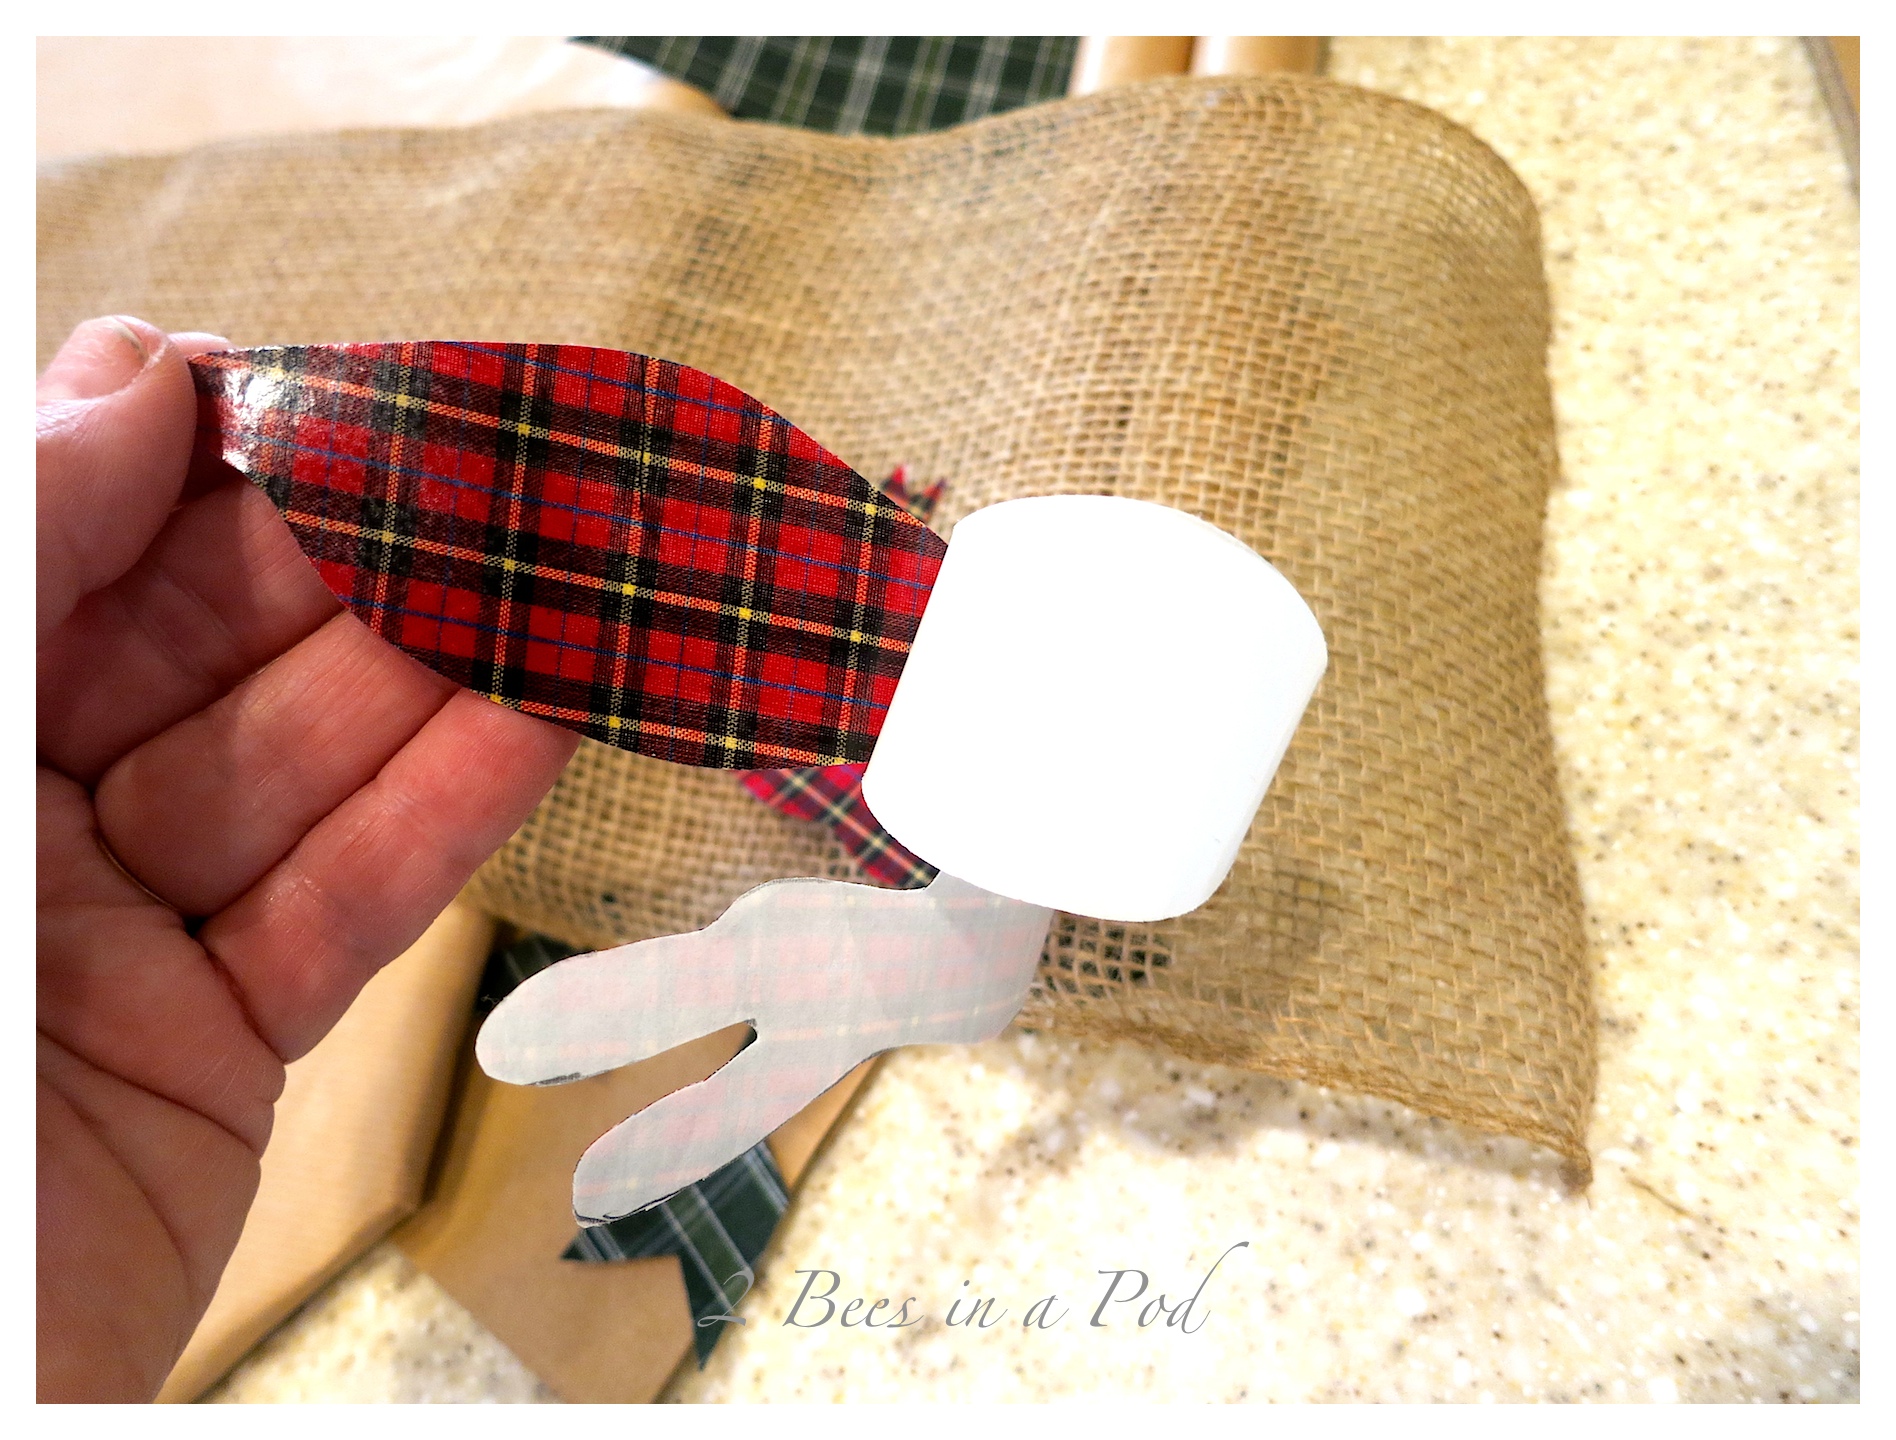 DIY Christmas Gift Wrap - Woodland Fox and Christmas Plaid. a hand painted wood slice fox as a gift tag. Bags Made from thrift store plaid shirts, Heat and Bond and cut out shapes ironed onto kraft bags. Also used a shirt as gift wrap and decorated the pocket :)